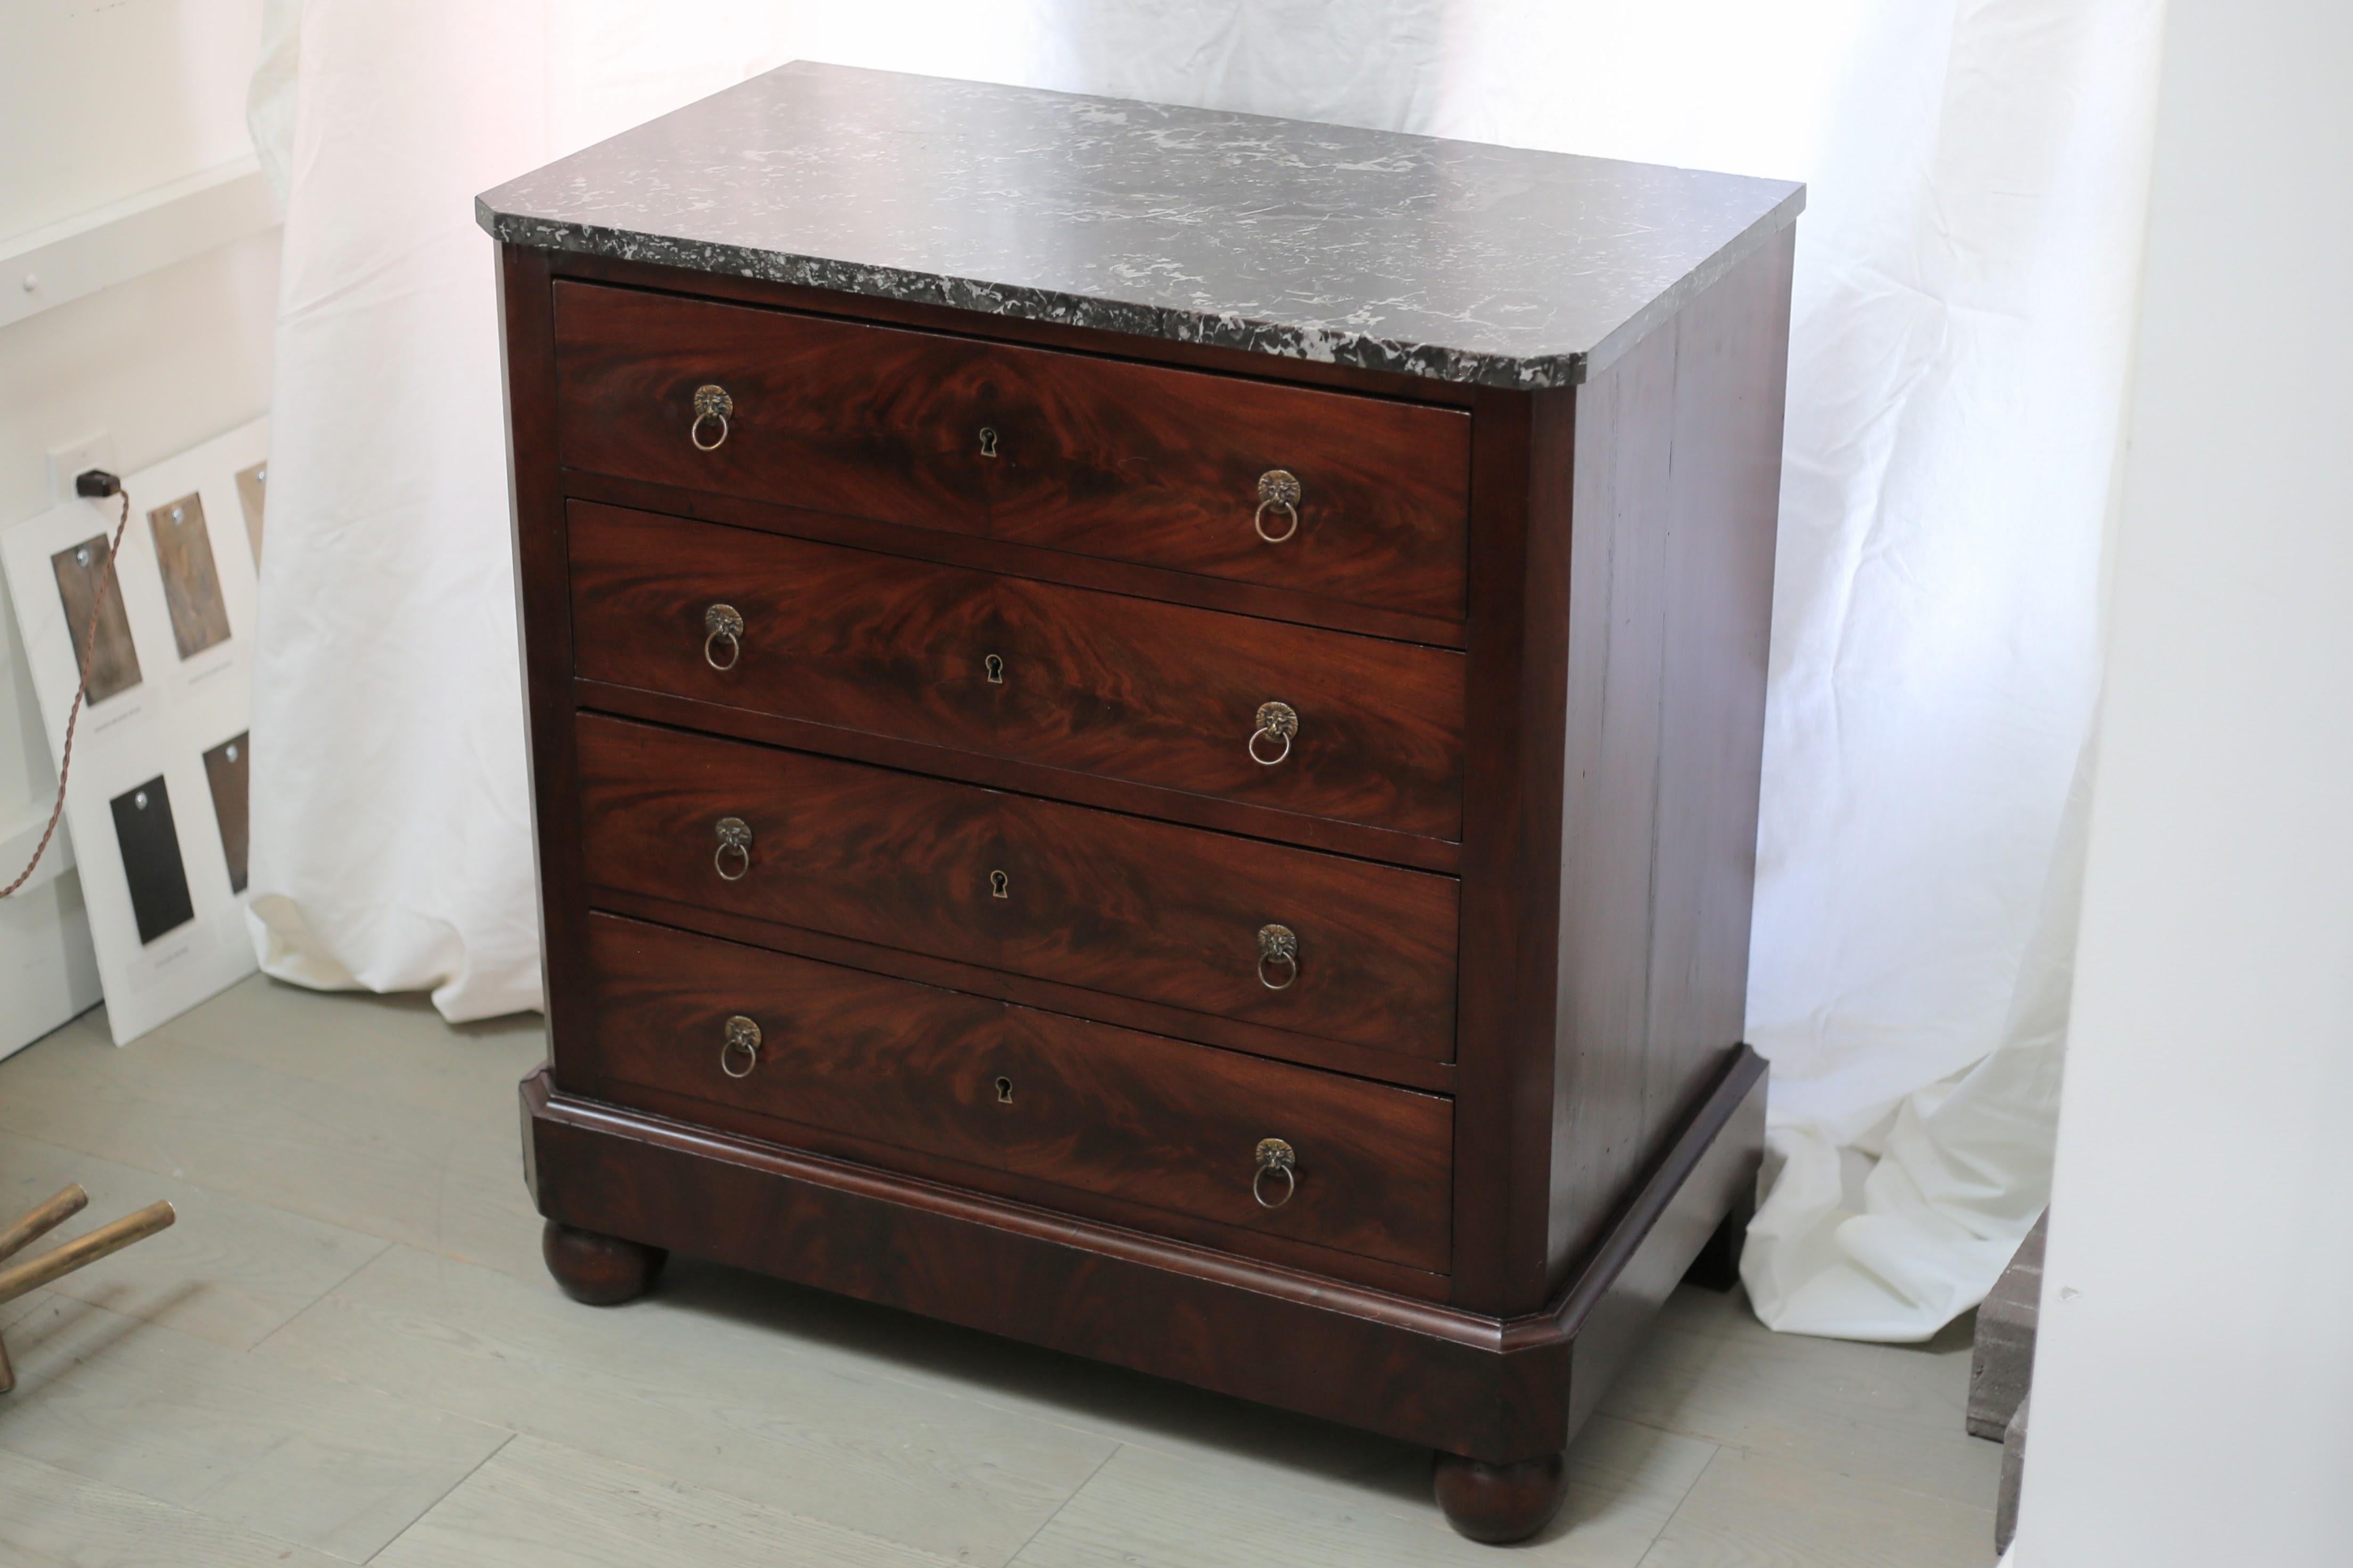 A beautiful antique French four drawer commode/chest of drawers with chamfered corners, marble top, bun feet, and brass lion ring pulls and escutcheons. Dovetail drawer joinery and bookmatched flame mahogany veneer on the drawer fronts. The marble